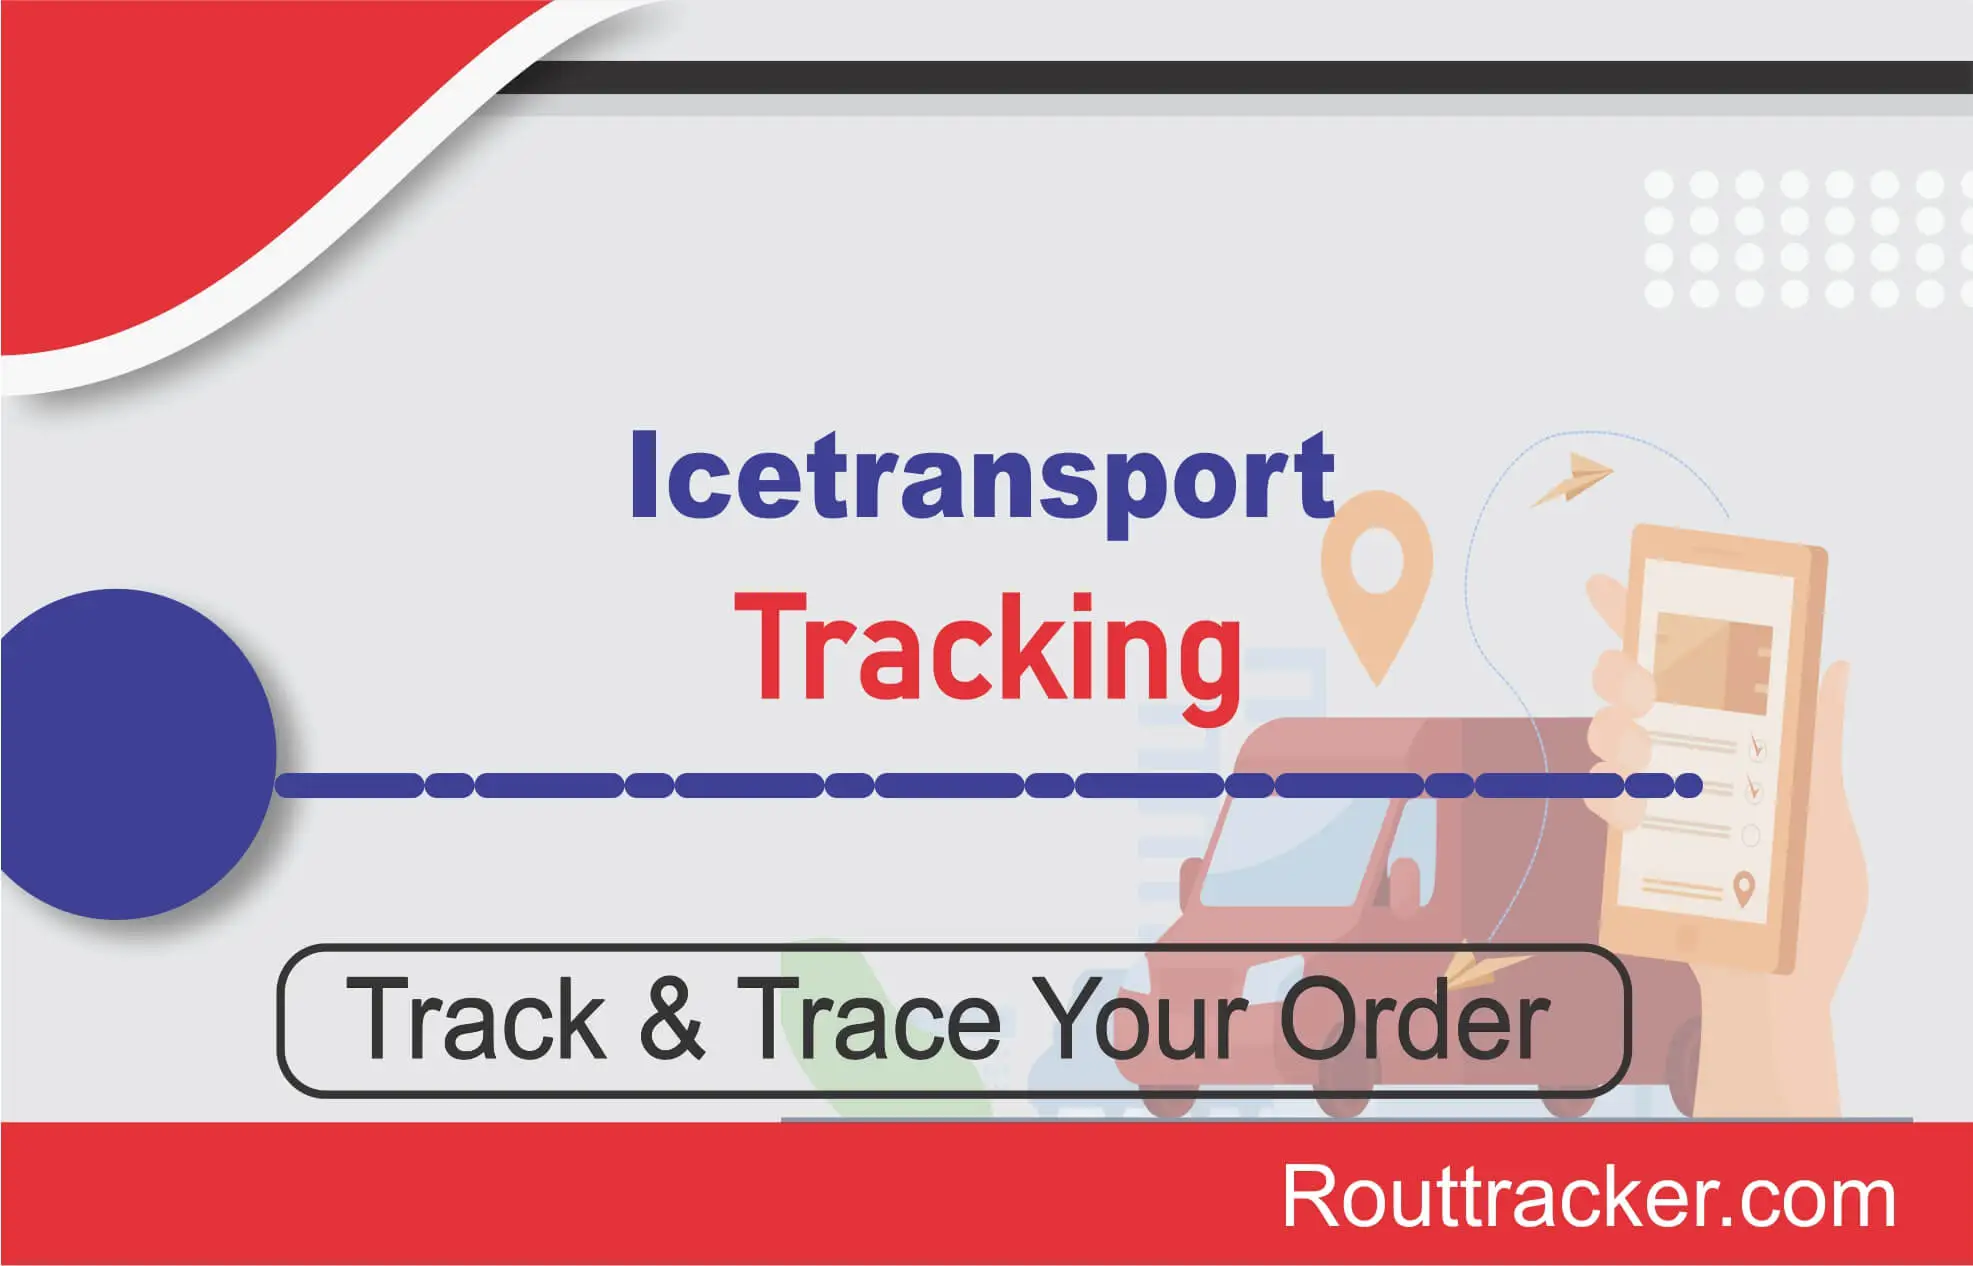 Icetransport Tracking